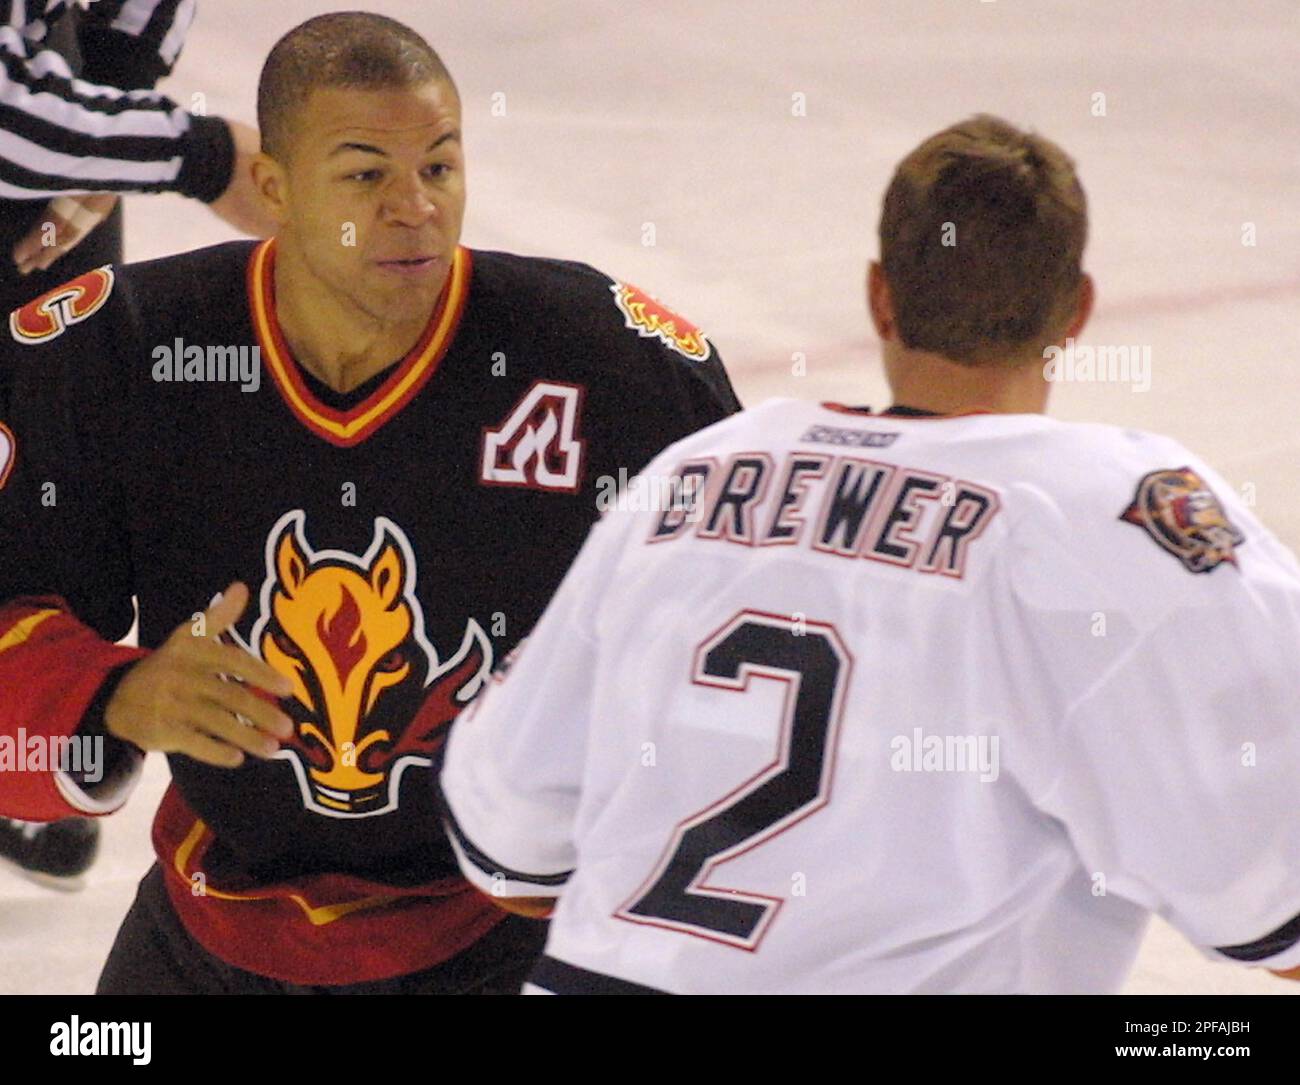 Edmonton Oilers Eric Brewer, right, and Calgary Flames Jarome